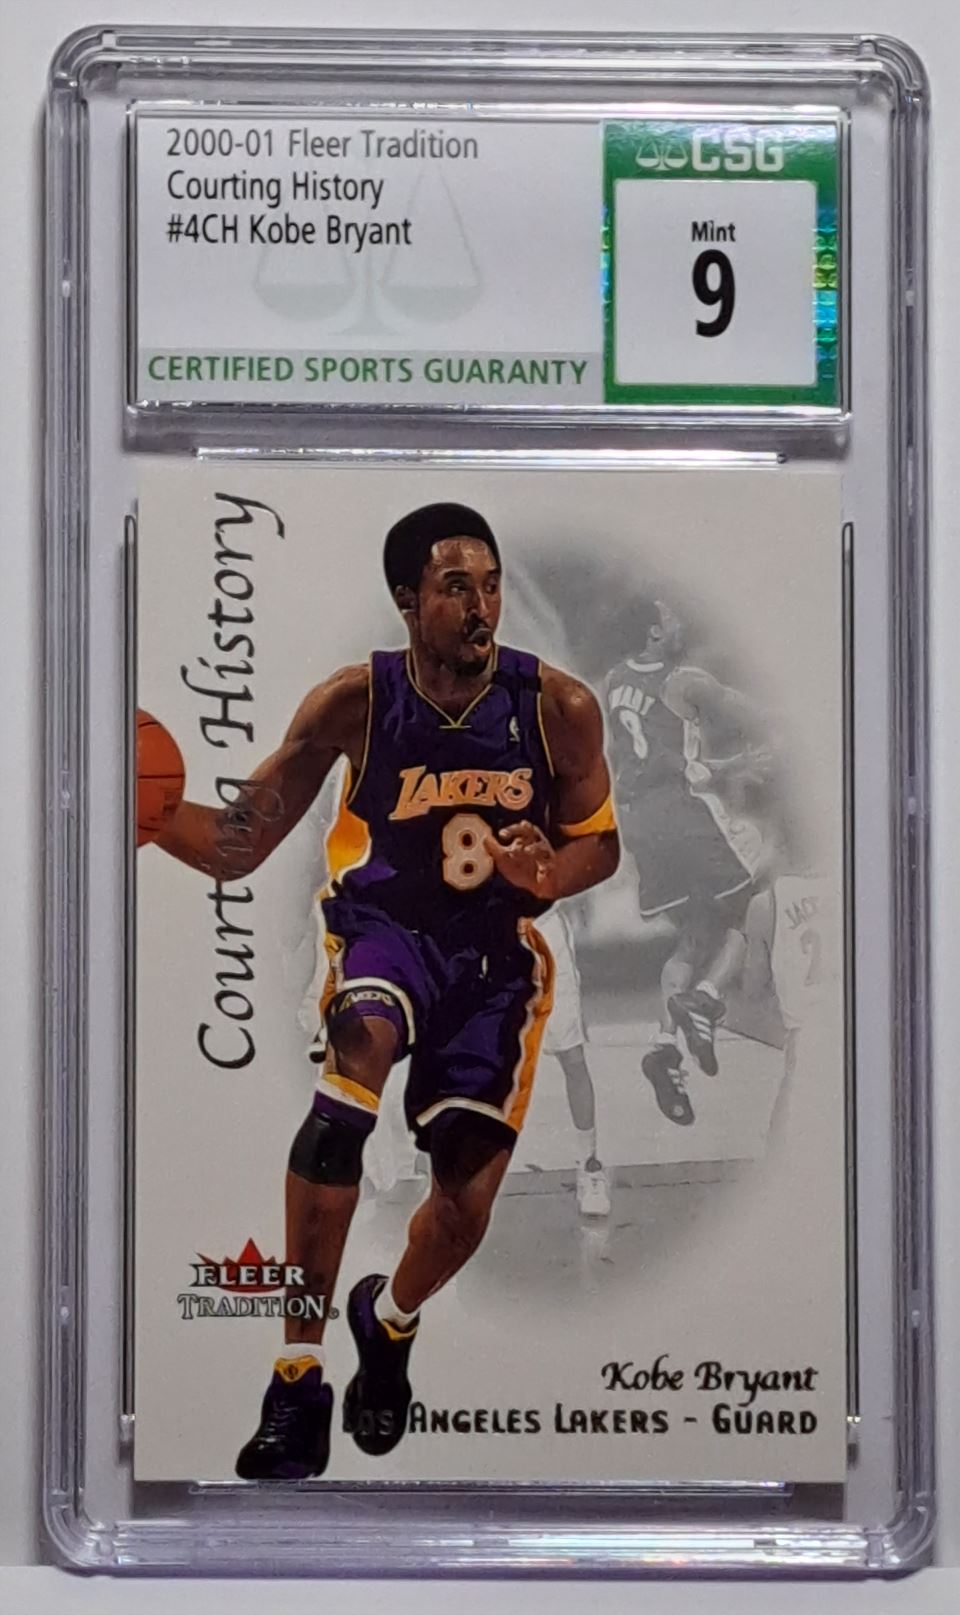 2000-01 Fleer Tradition Kobe Bryant #CH4 card front image